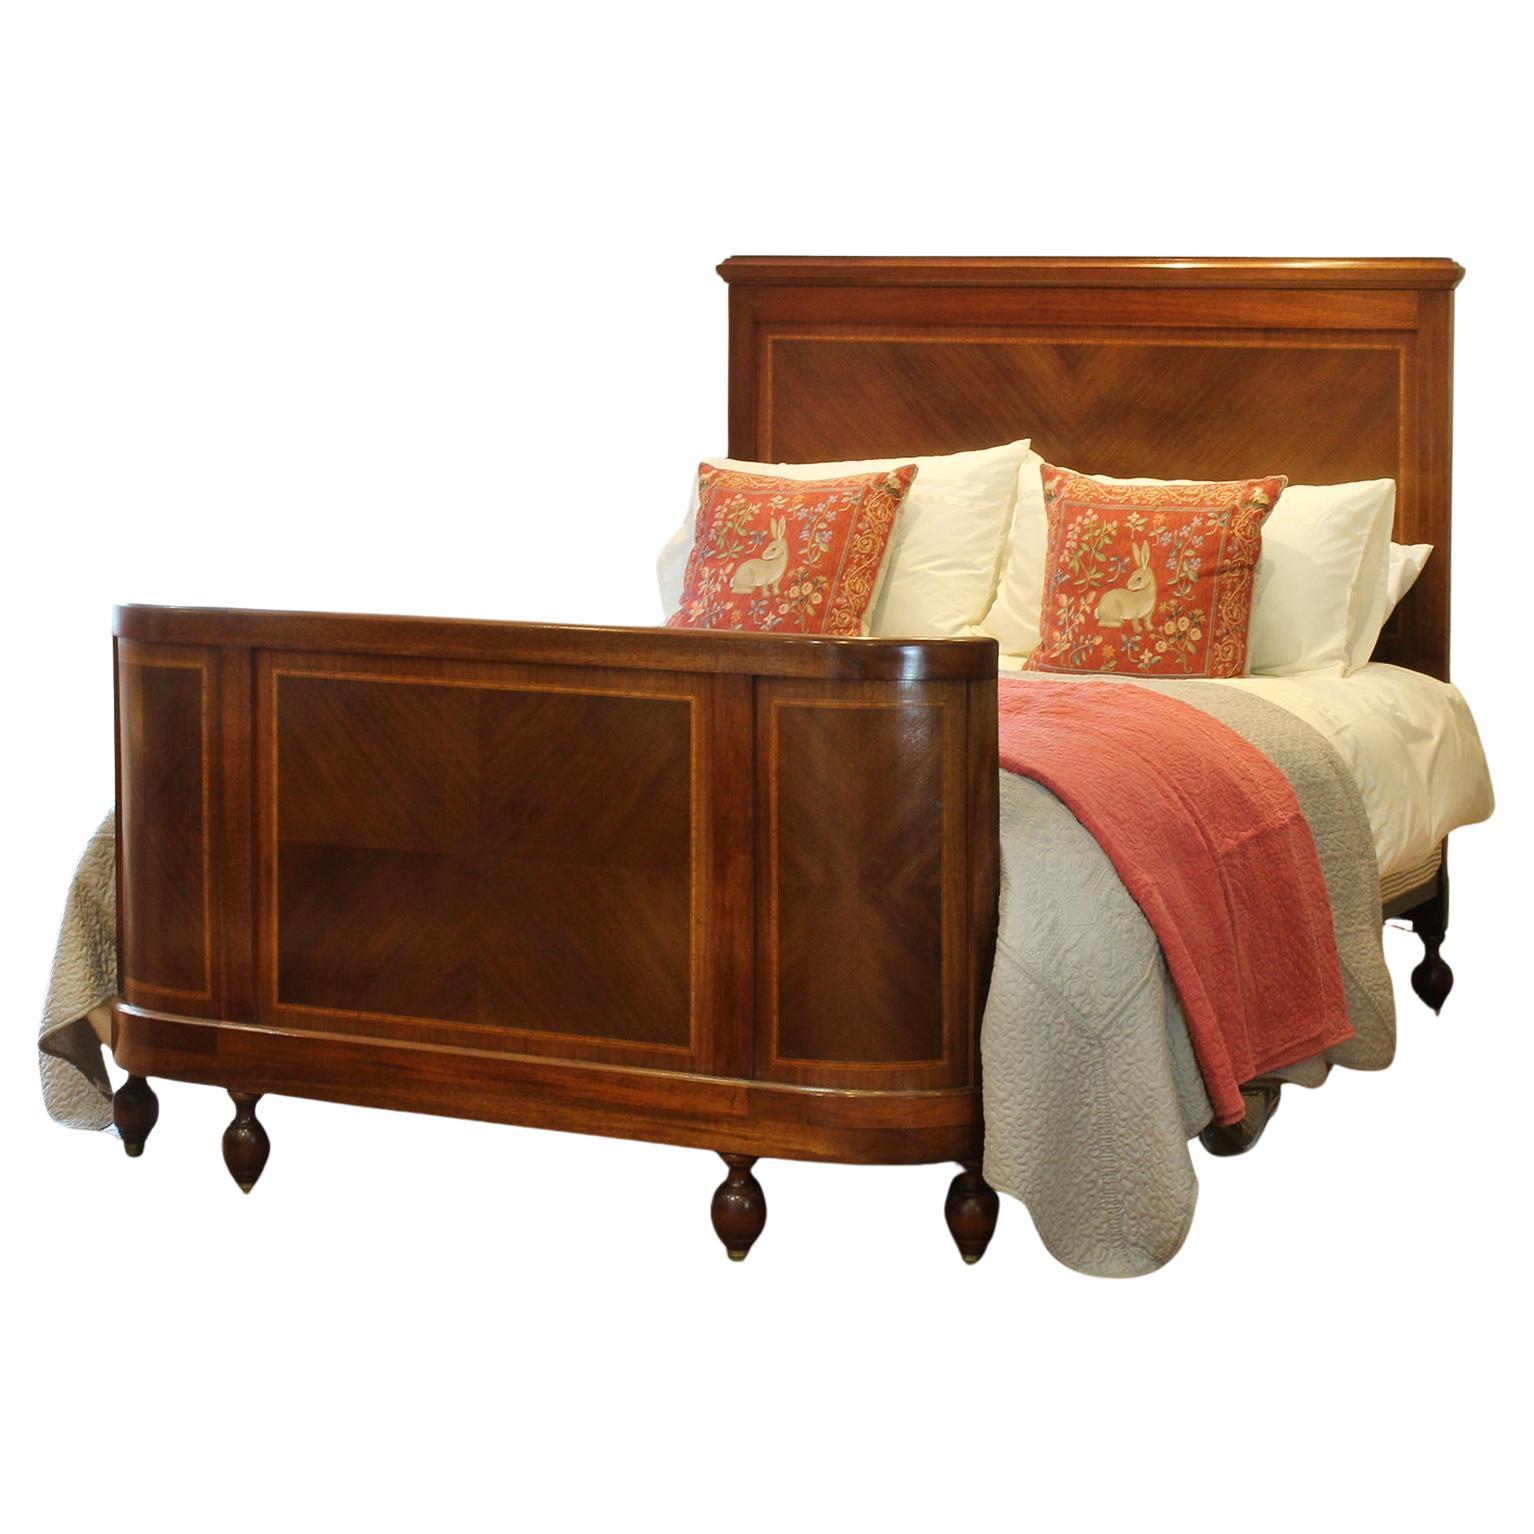 Inlaid Bow Foot Mahogany Antique Wooden Bed, WK187